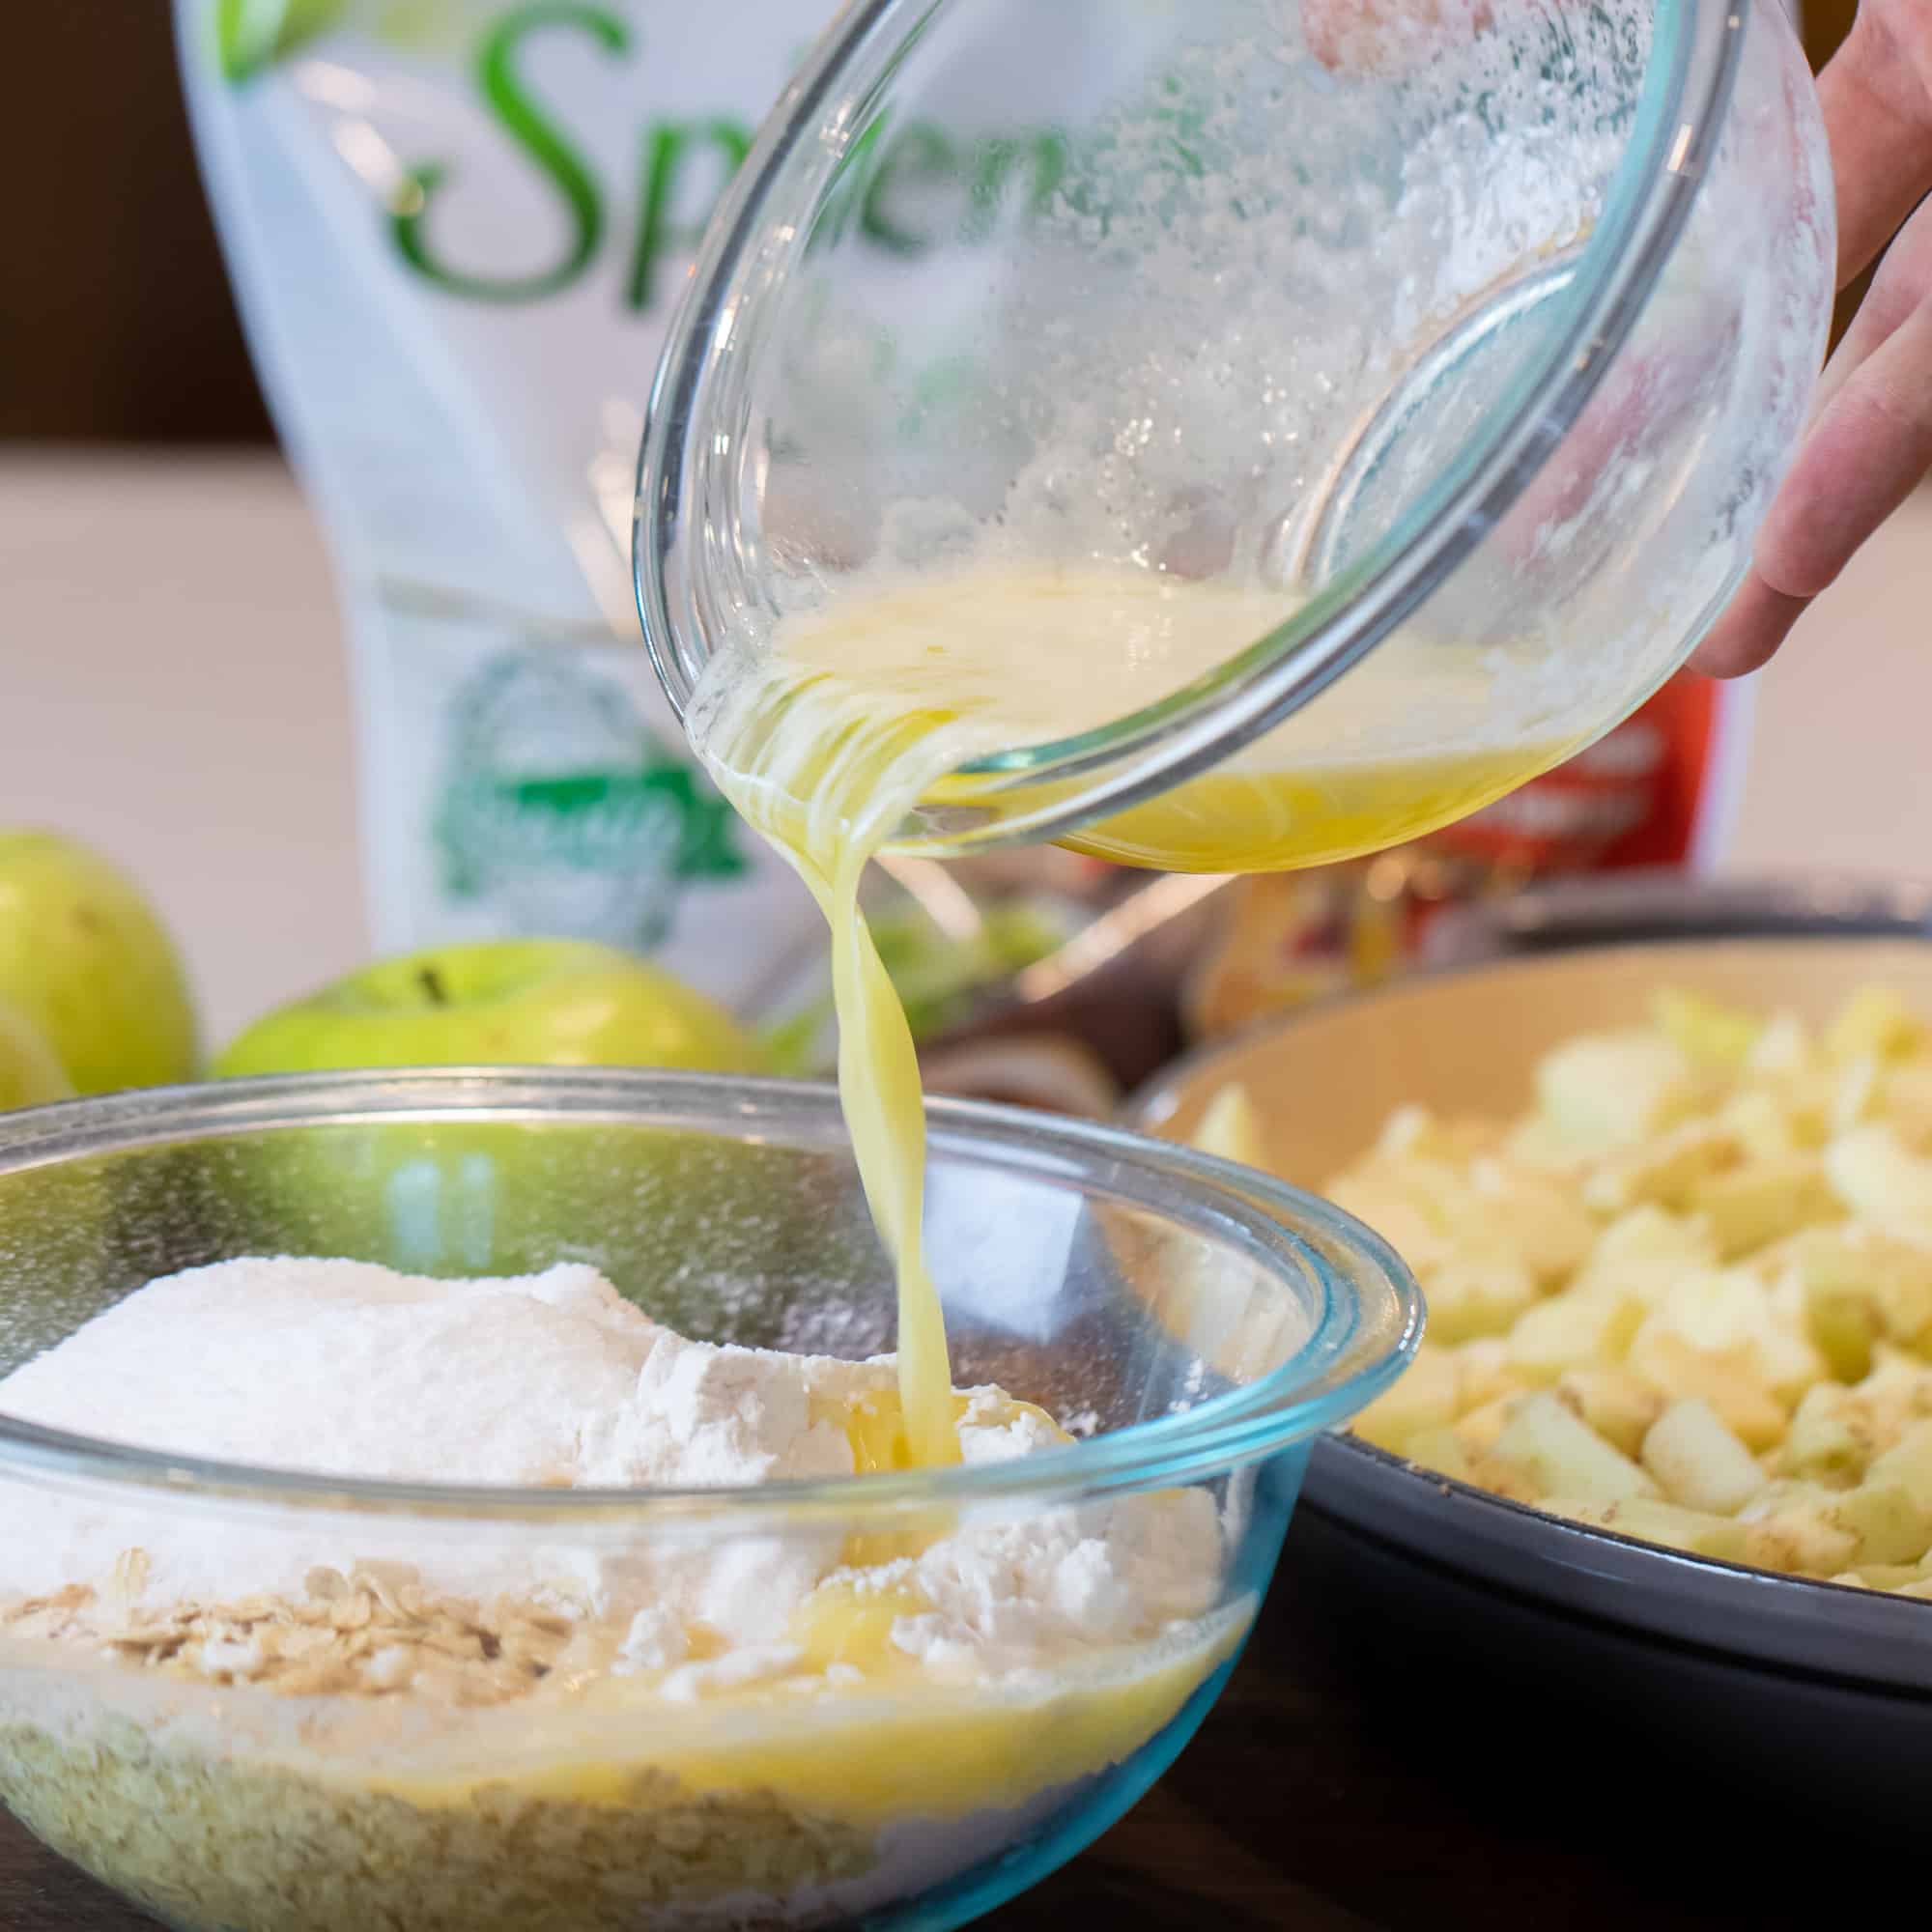 Pour the melted butter with the Splenda Stevia, oats, flour and cinnamon